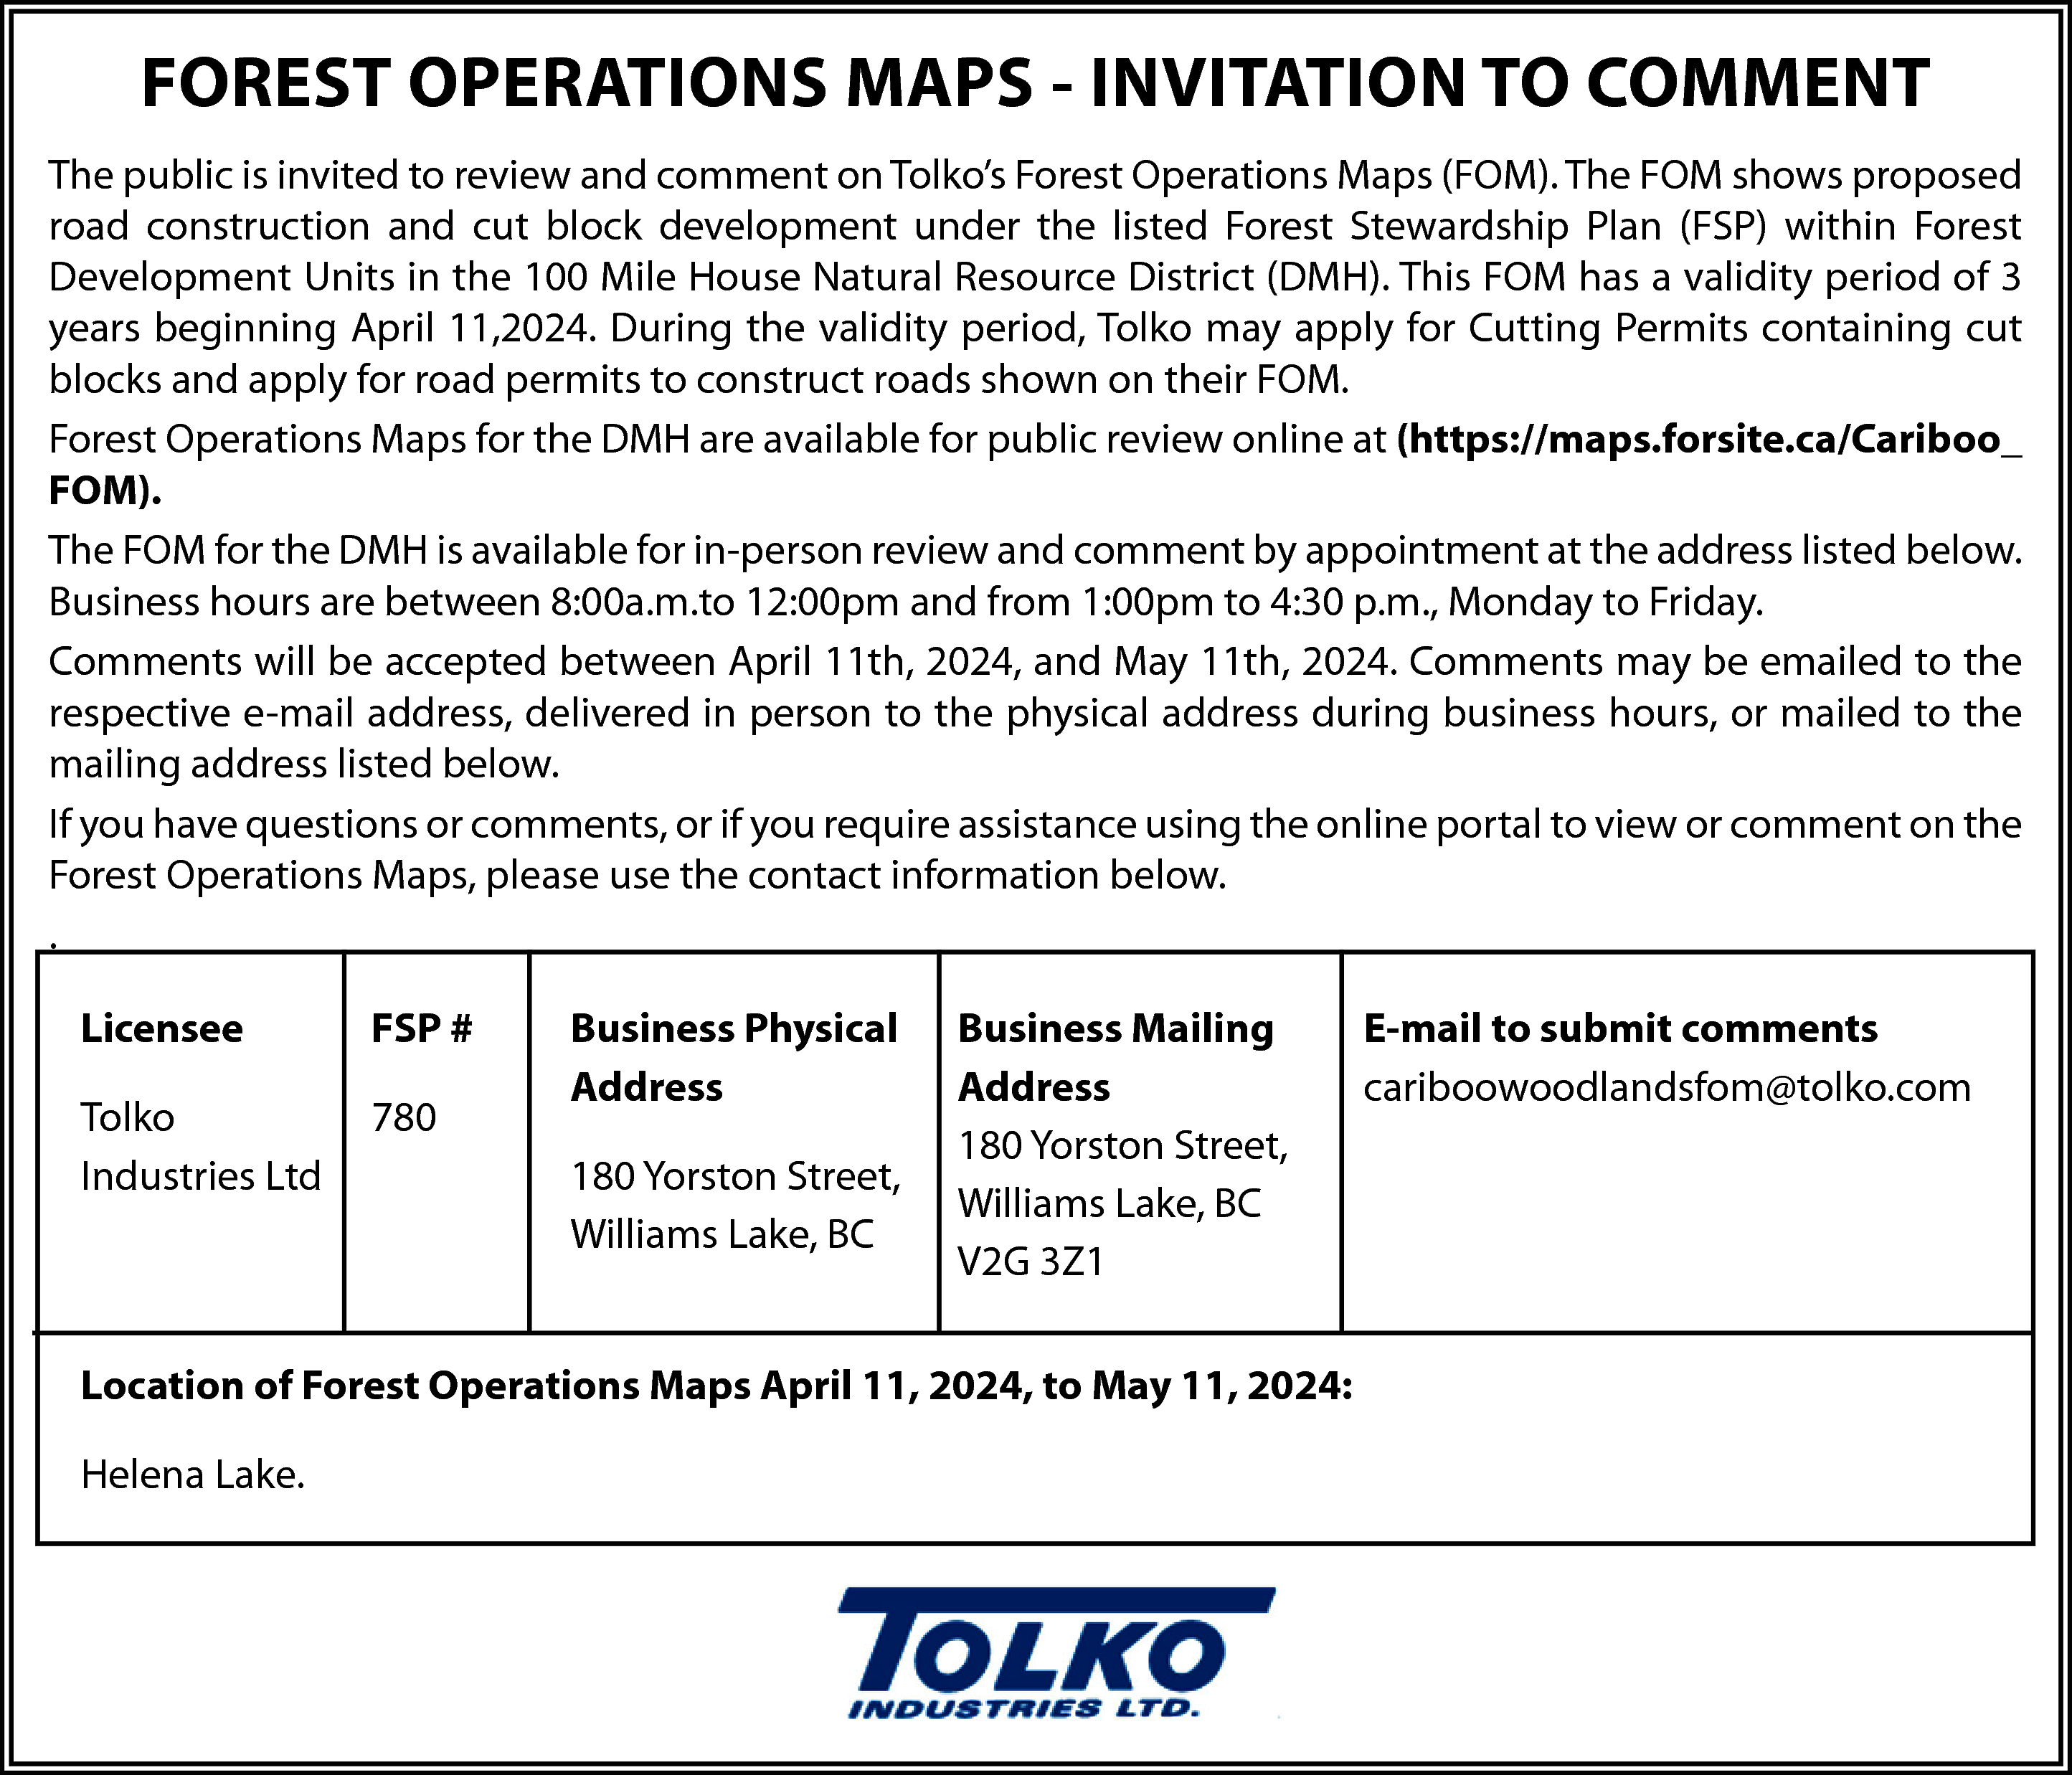 FOREST OPERATIONS MAPS - INVITATION  FOREST OPERATIONS MAPS - INVITATION TO COMMENT  The public is invited to review and comment on Tolko’s Forest Operations Maps (FOM). The FOM shows proposed  road construction and cut block development under the listed Forest Stewardship Plan (FSP) within Forest  Development Units in the 100 Mile House Natural Resource District (DMH). This FOM has a validity period of 3  years beginning April 11,2024. During the validity period, Tolko may apply for Cutting Permits containing cut  blocks and apply for road permits to construct roads shown on their FOM.  Forest Operations Maps for the DMH are available for public review online at (https://maps.forsite.ca/Cariboo_  FOM).  The FOM for the DMH is available for in-person review and comment by appointment at the address listed below.  Business hours are between 8:00a.m.to 12:00pm and from 1:00pm to 4:30 p.m., Monday to Friday.  Comments will be accepted between April 11th, 2024, and May 11th, 2024. Comments may be emailed to the  respective e-mail address, delivered in person to the physical address during business hours, or mailed to the  mailing address listed below.  If you have questions or comments, or if you require assistance using the online portal to view or comment on the  Forest Operations Maps, please use the contact information below.  .  Licensee    FSP #    Tolko  Industries Ltd    780    Business Physical  Address  180 Yorston Street,  Williams Lake, BC    Business Mailing  Address  180 Yorston Street,  Williams Lake, BC  V2G 3Z1    Location of Forest Operations Maps April 11, 2024, to May 11, 2024:  Helena Lake.    E-mail to submit comments  cariboowoodlandsfom@tolko.com    